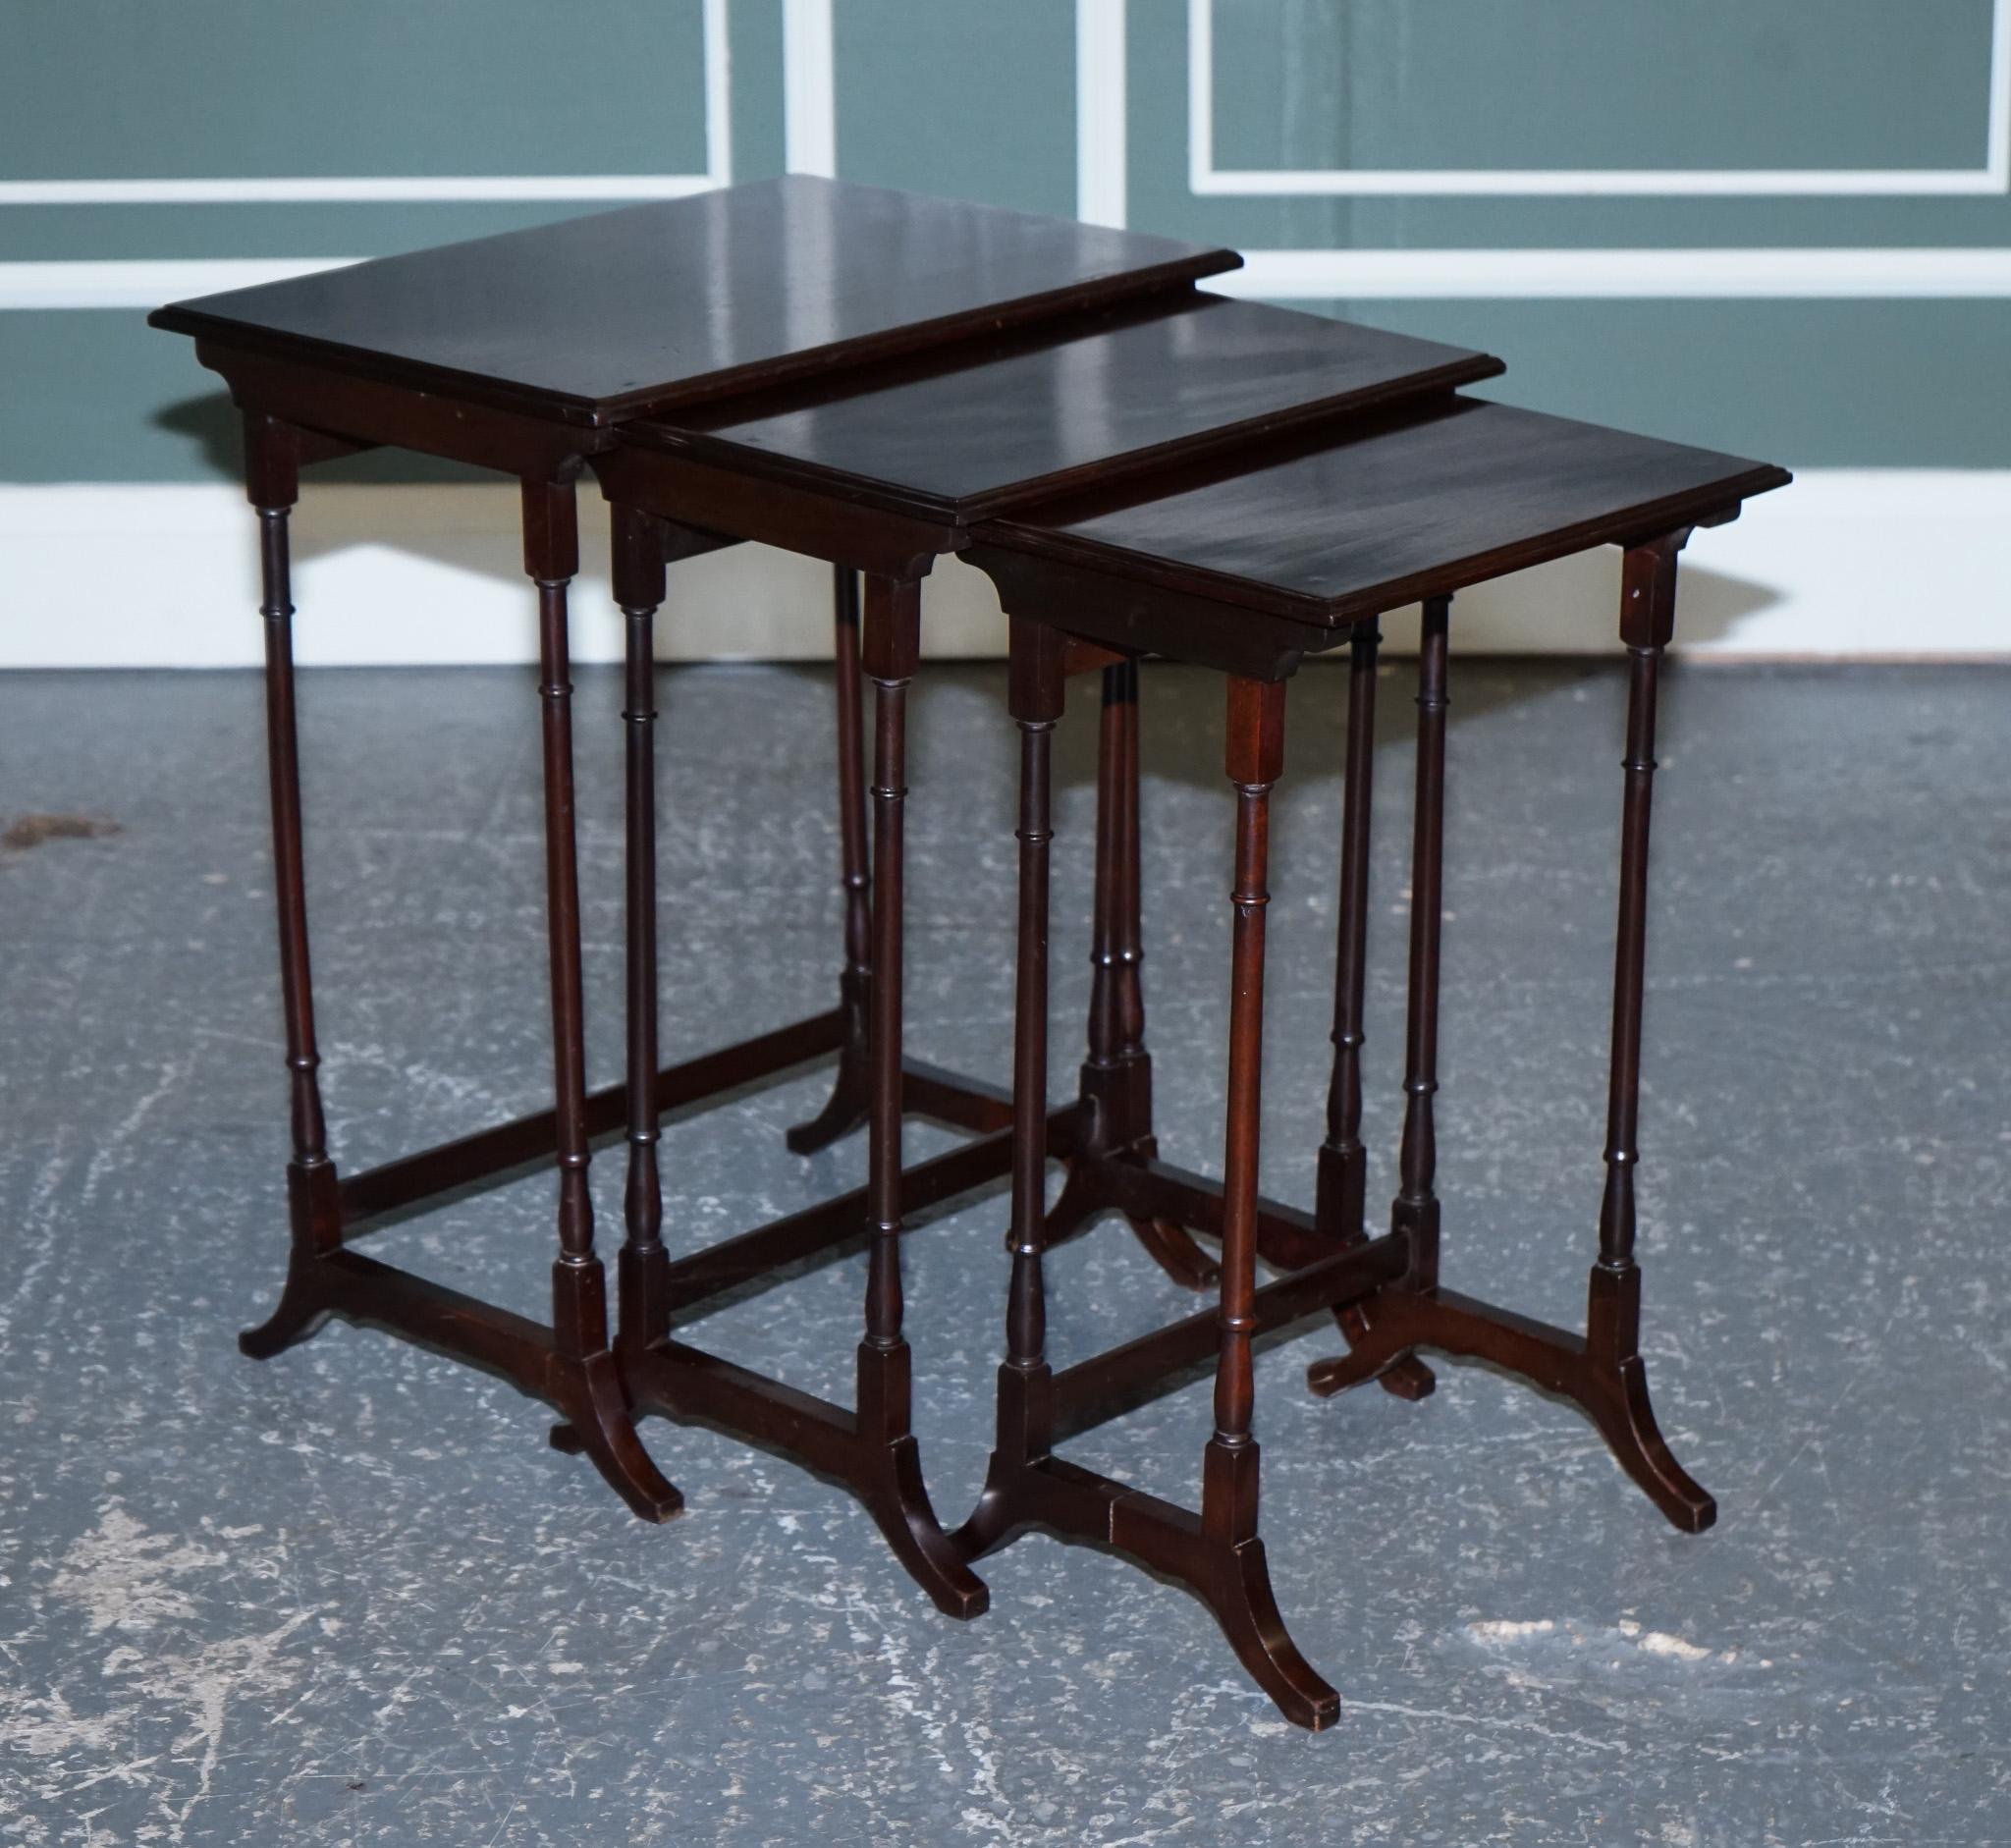 We are delighted to offer for sale this beautiful antique 1880s set of three nesting tables.

We have lightly restored this by cleaning it, waxing and hand polishing it.

Please carefully examine the pictures to see the condition before